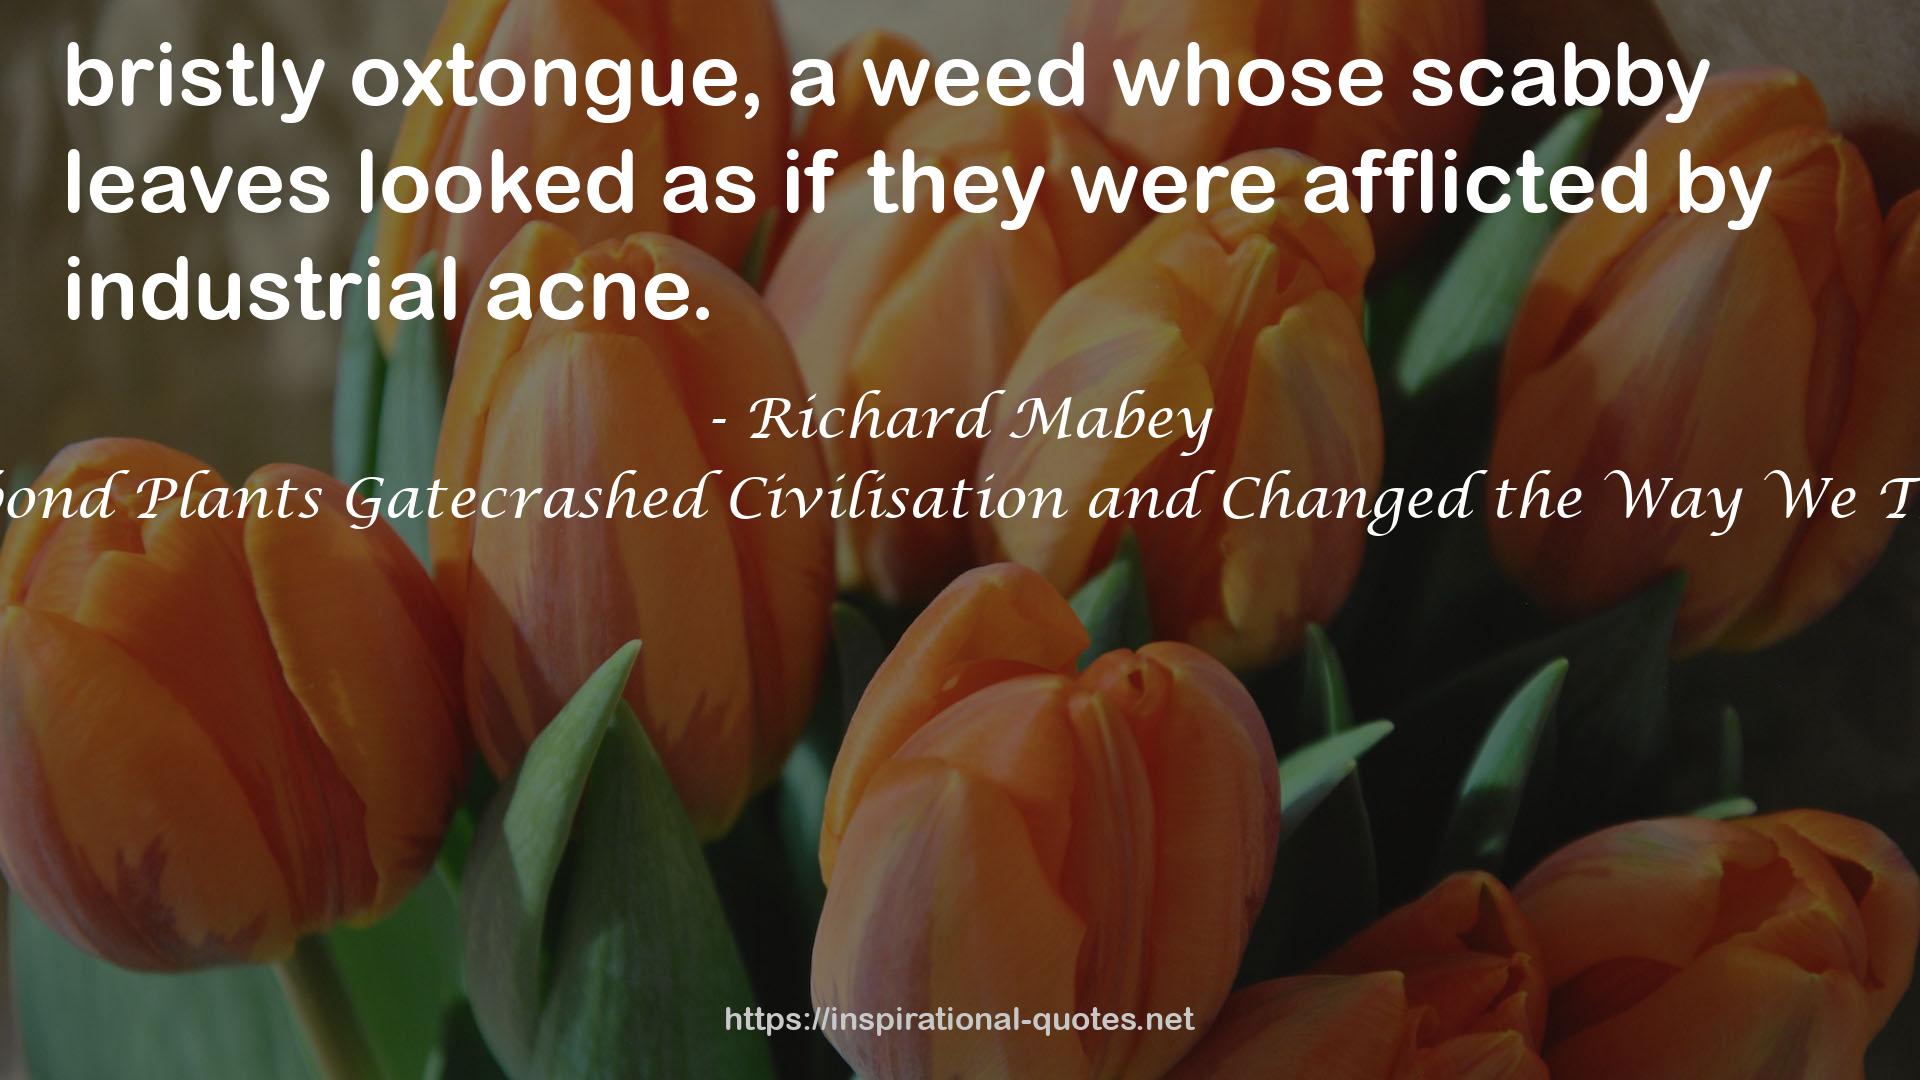 Weeds: How Vagabond Plants Gatecrashed Civilisation and Changed the Way We Think About Nature QUOTES